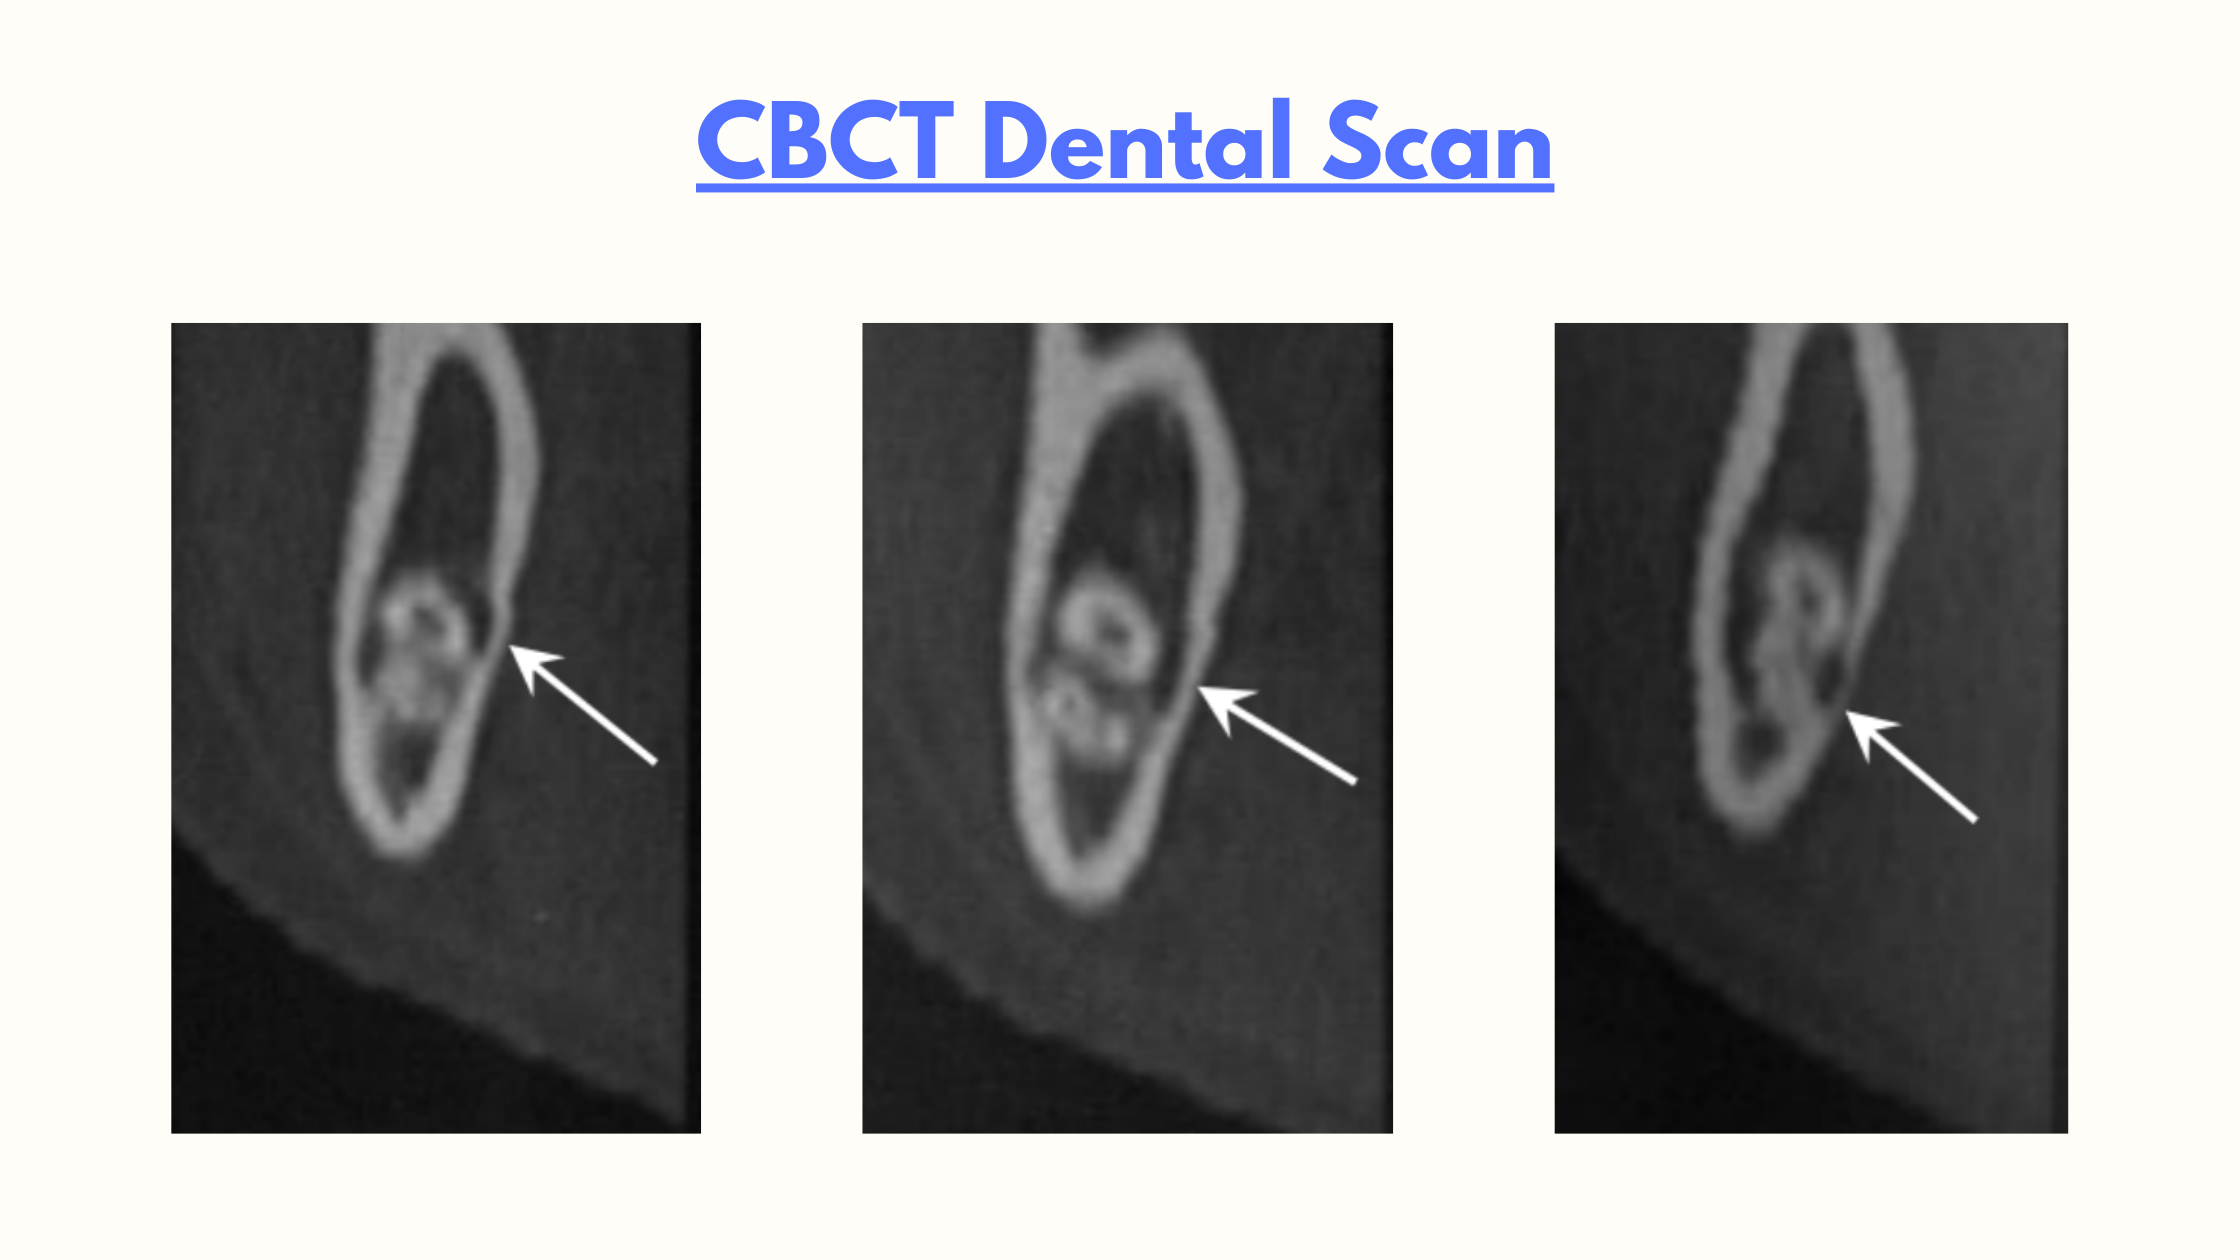 CBCT images showing the close relationship between the wisdom teeth and the inferior alveolar canal.